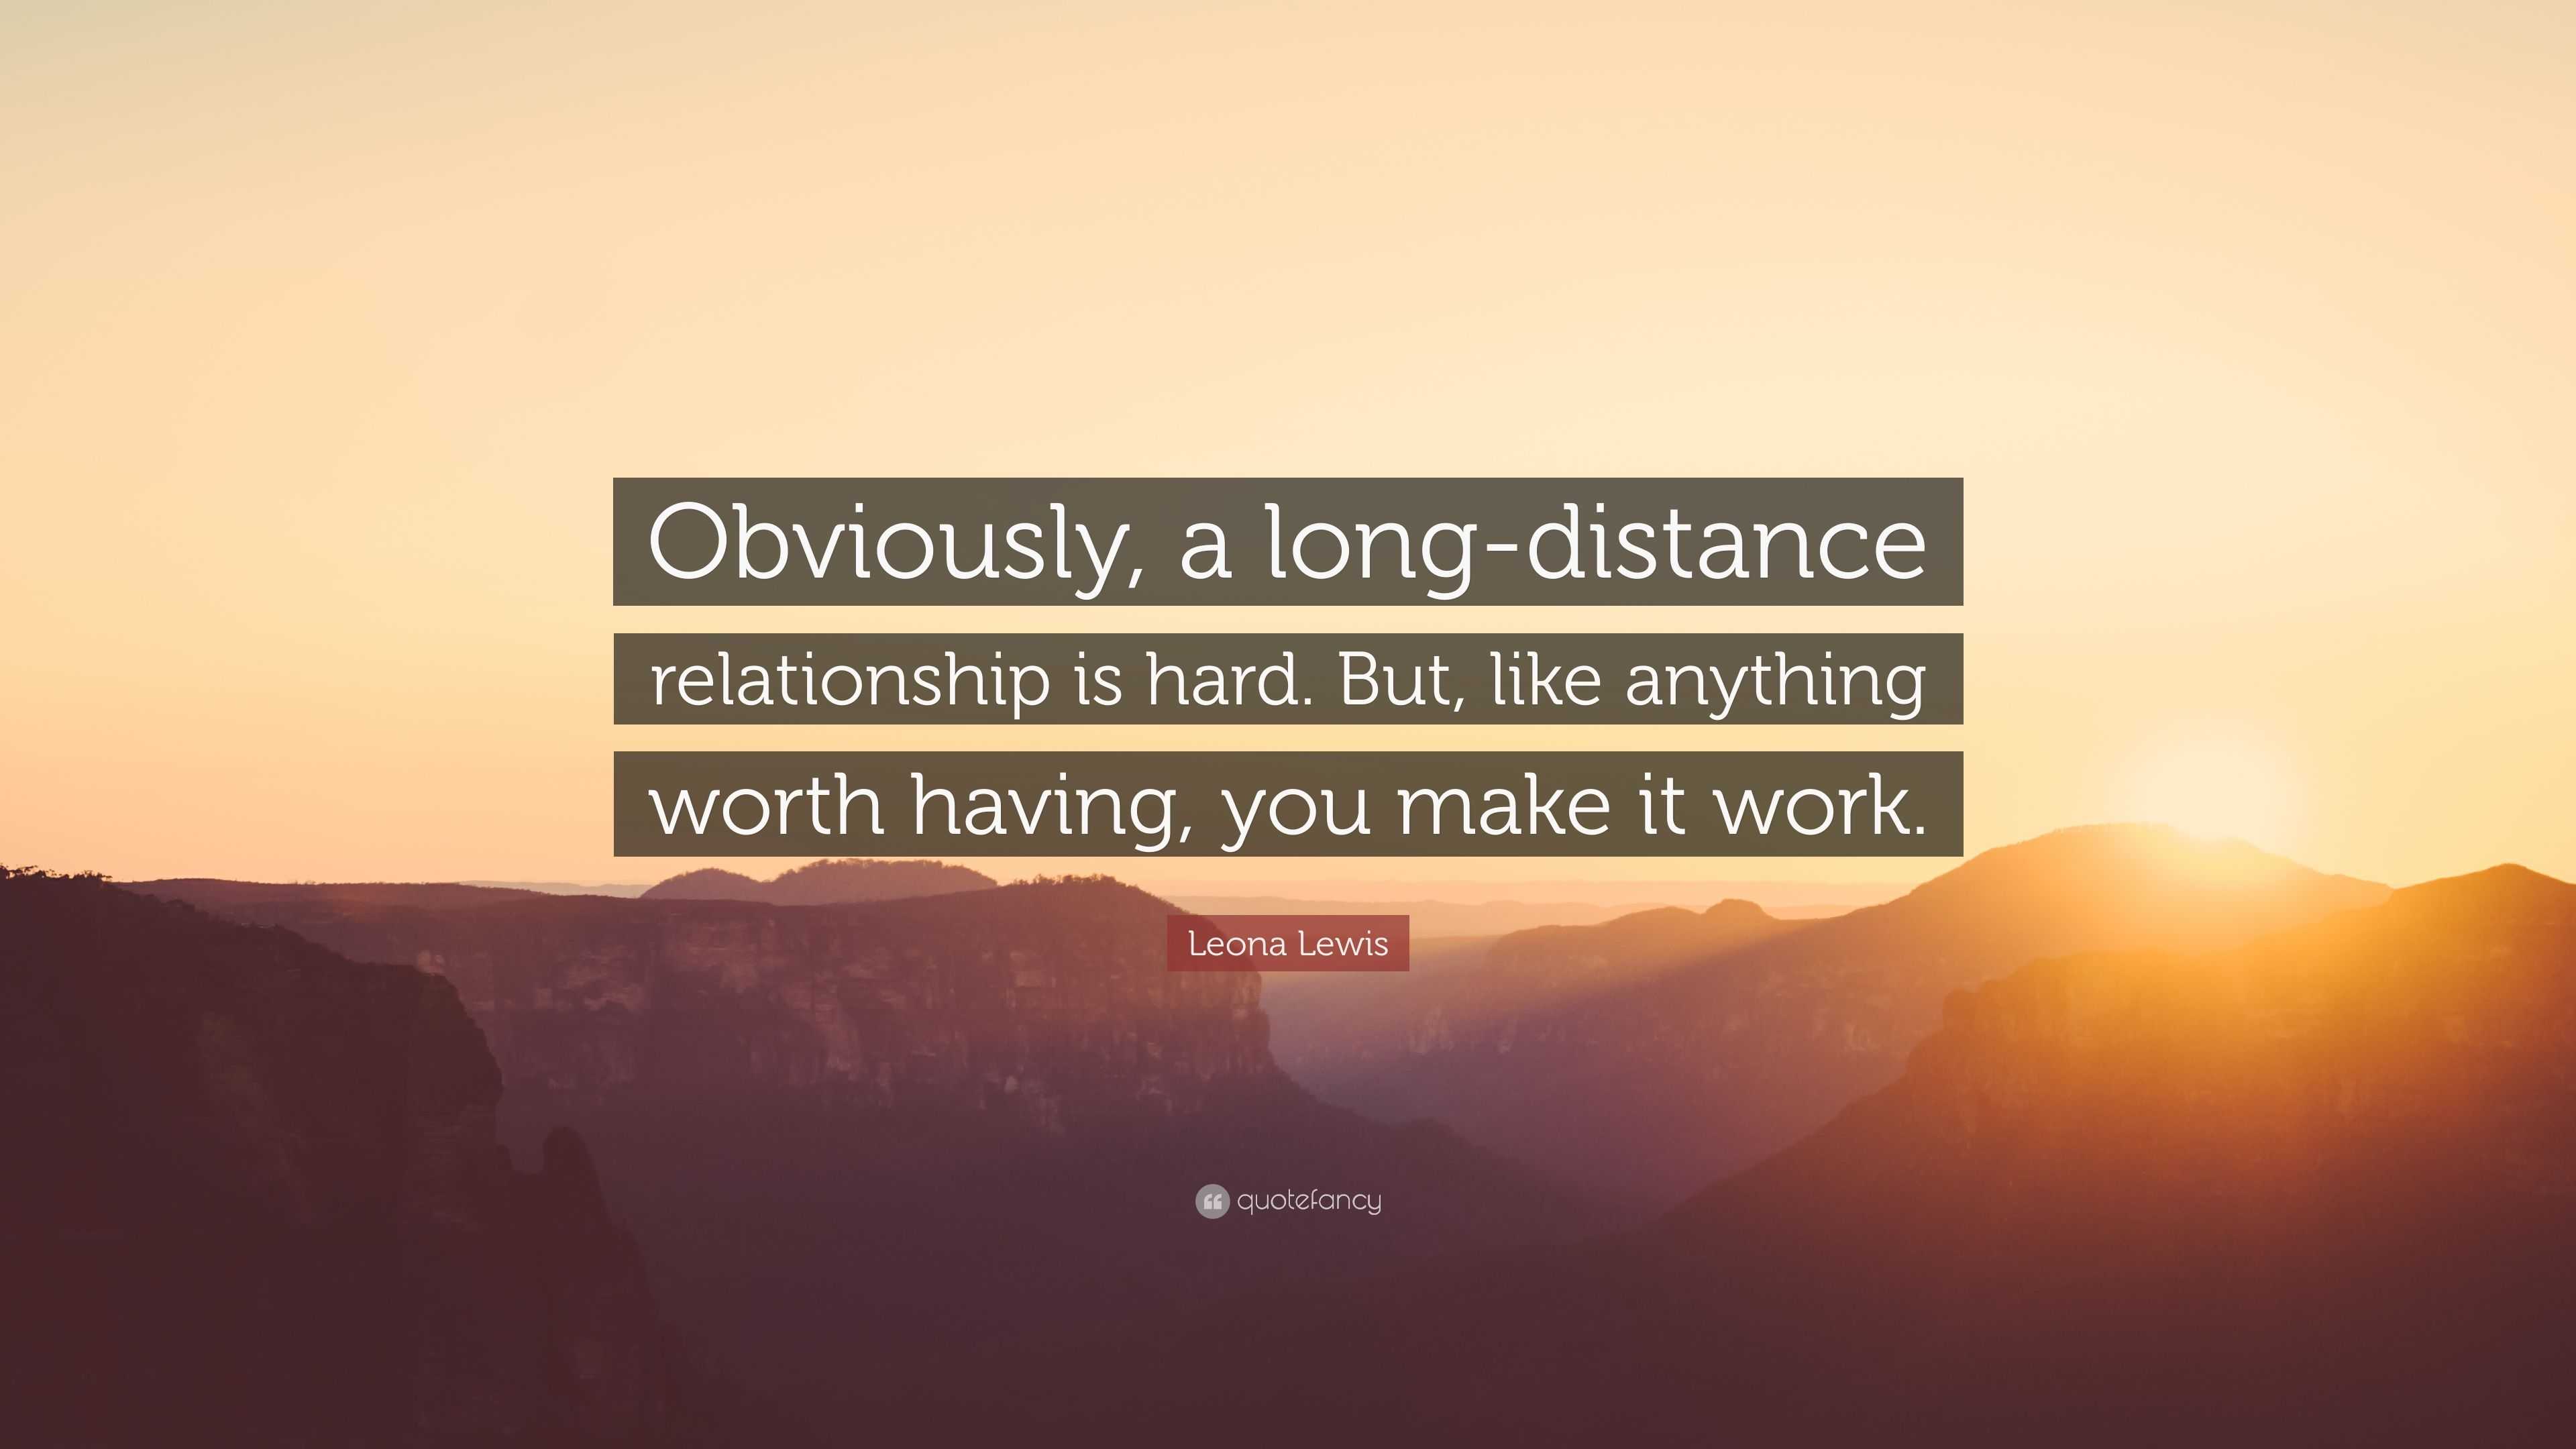 quotes about relationships being hard but worth it